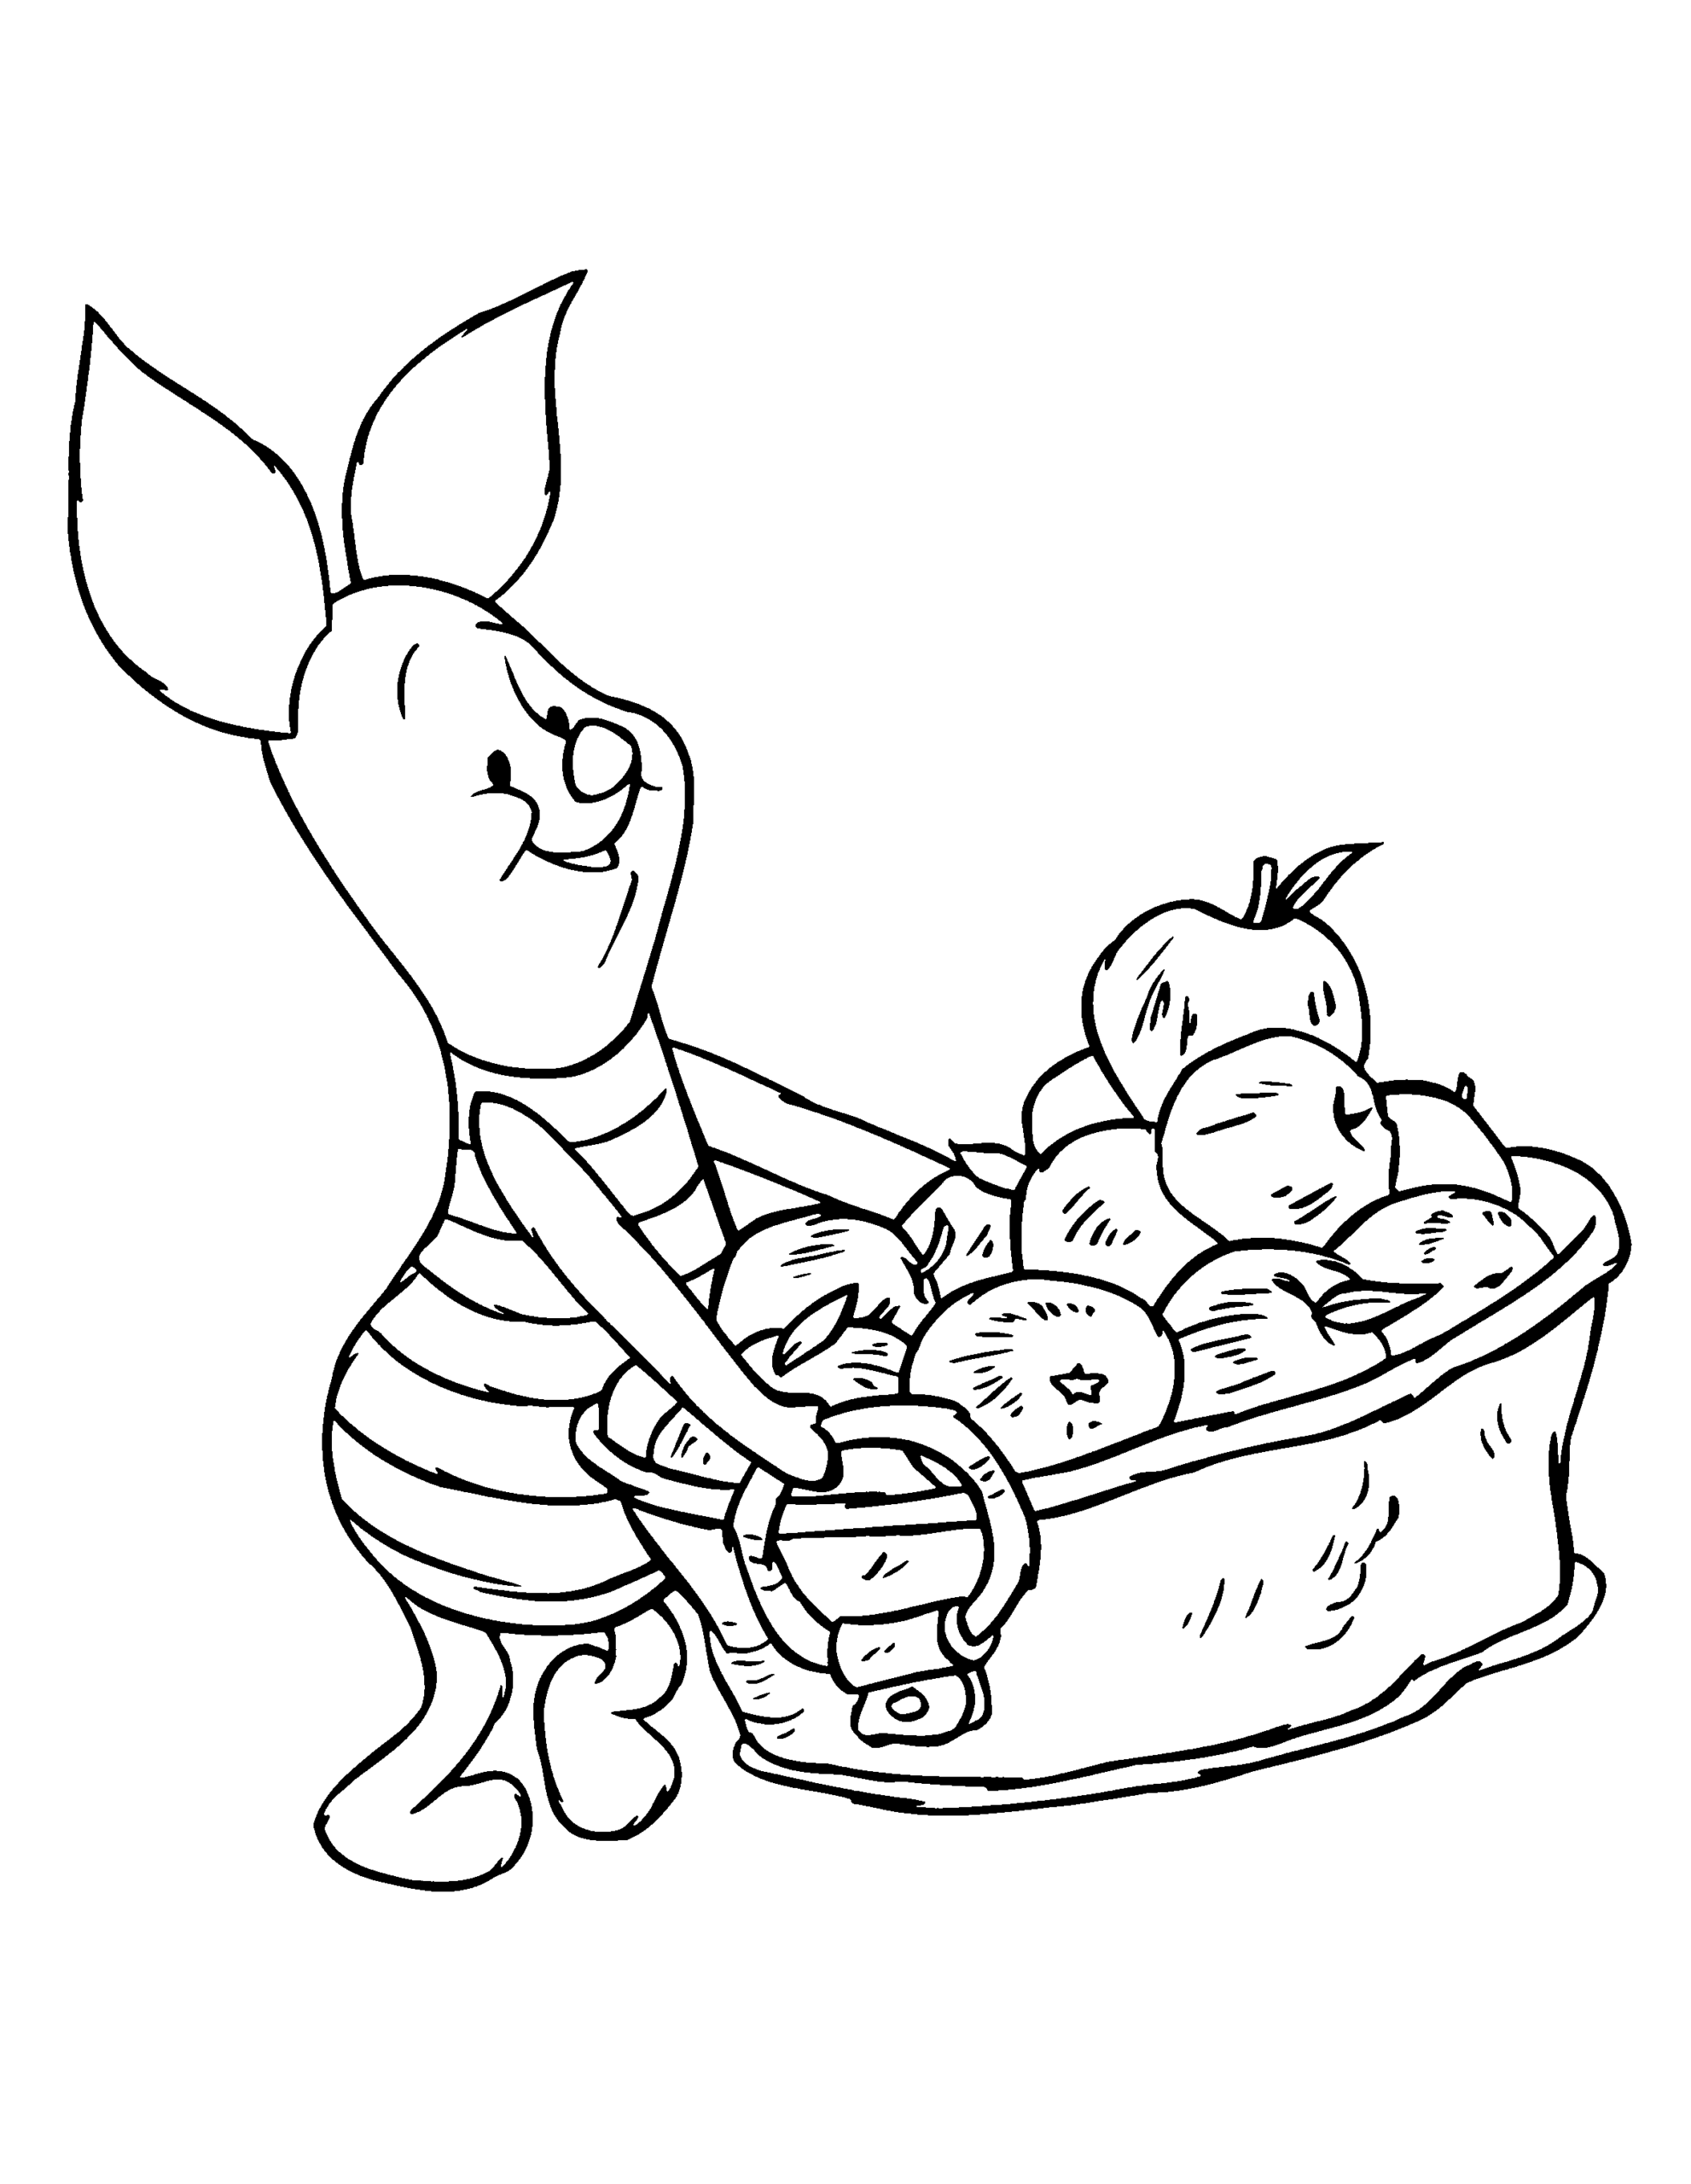 Winnie the Pooh Coloring Pages Cartoons winnie the pooh 35 Printable 2020 7140 Coloring4free